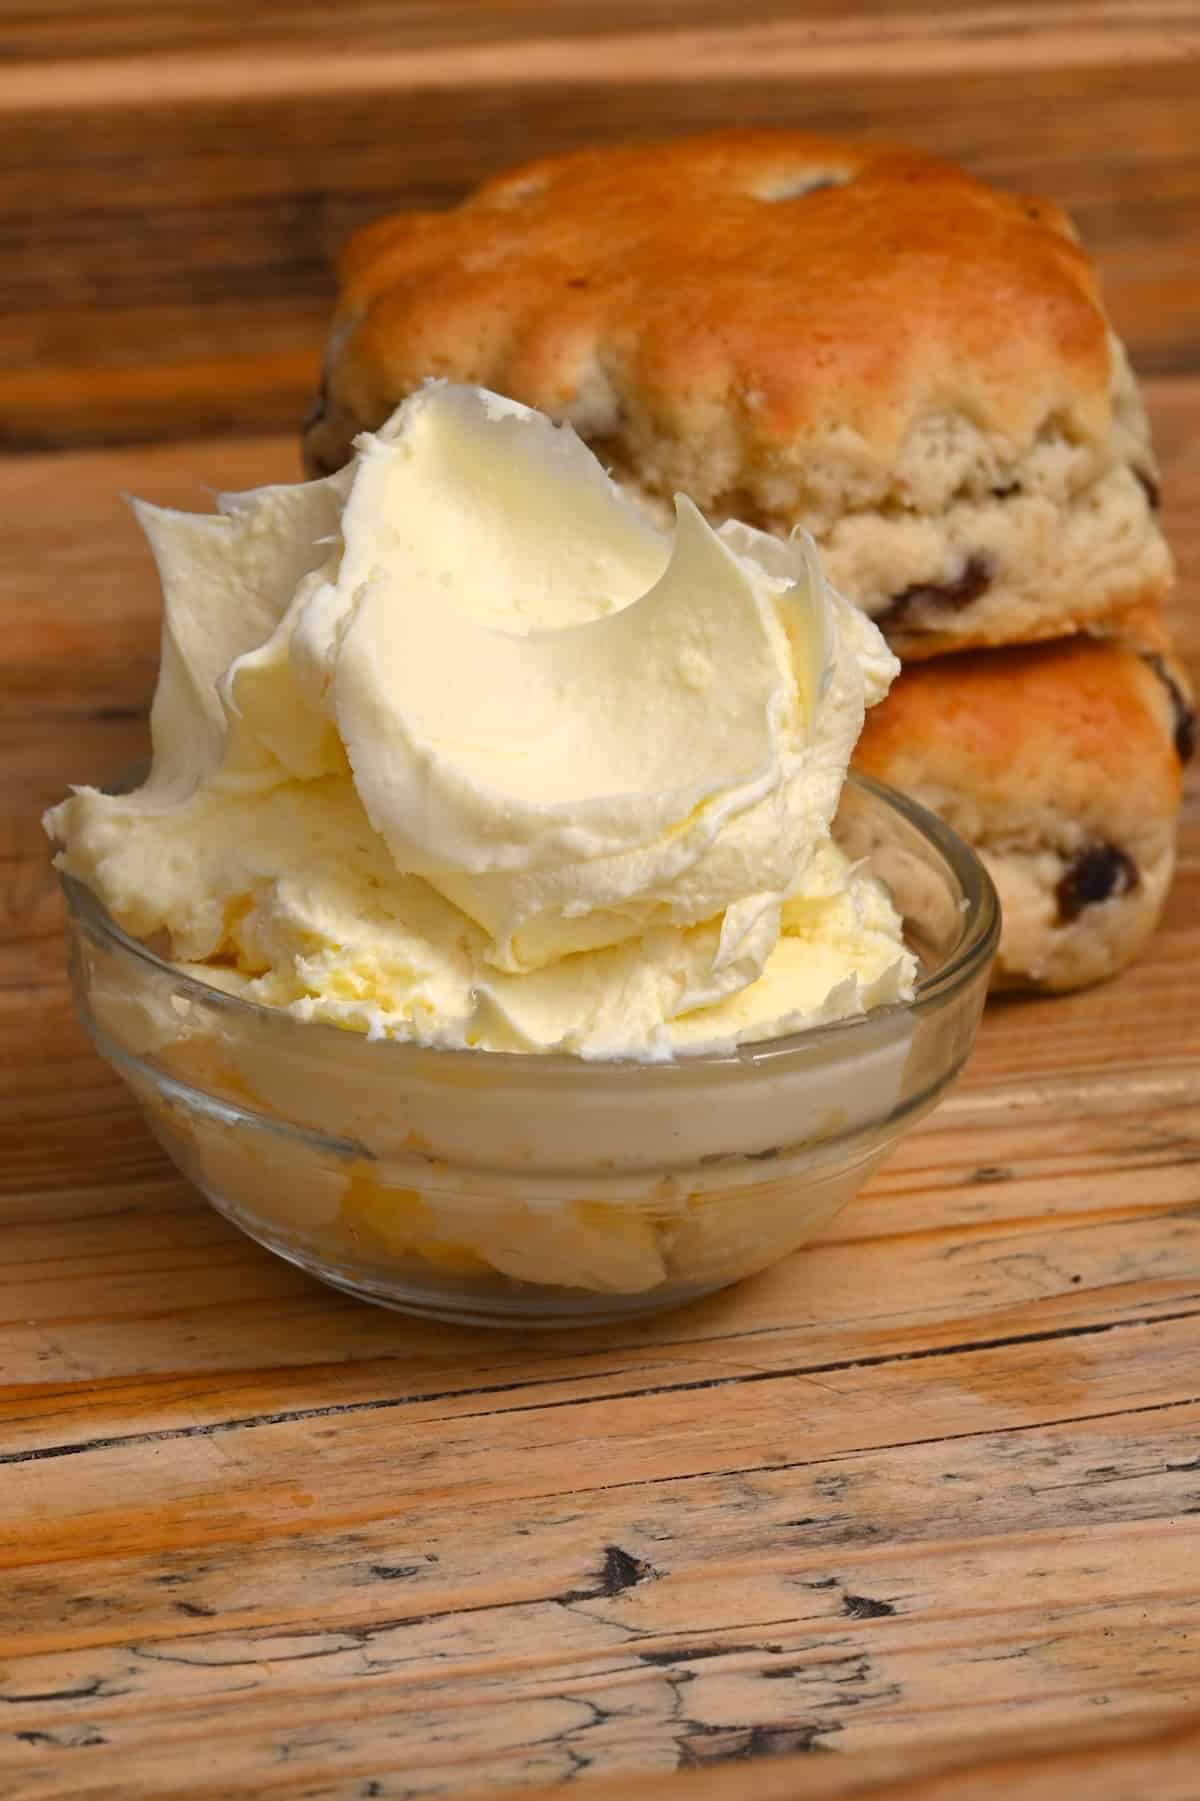 Clotted cream in a small bowl